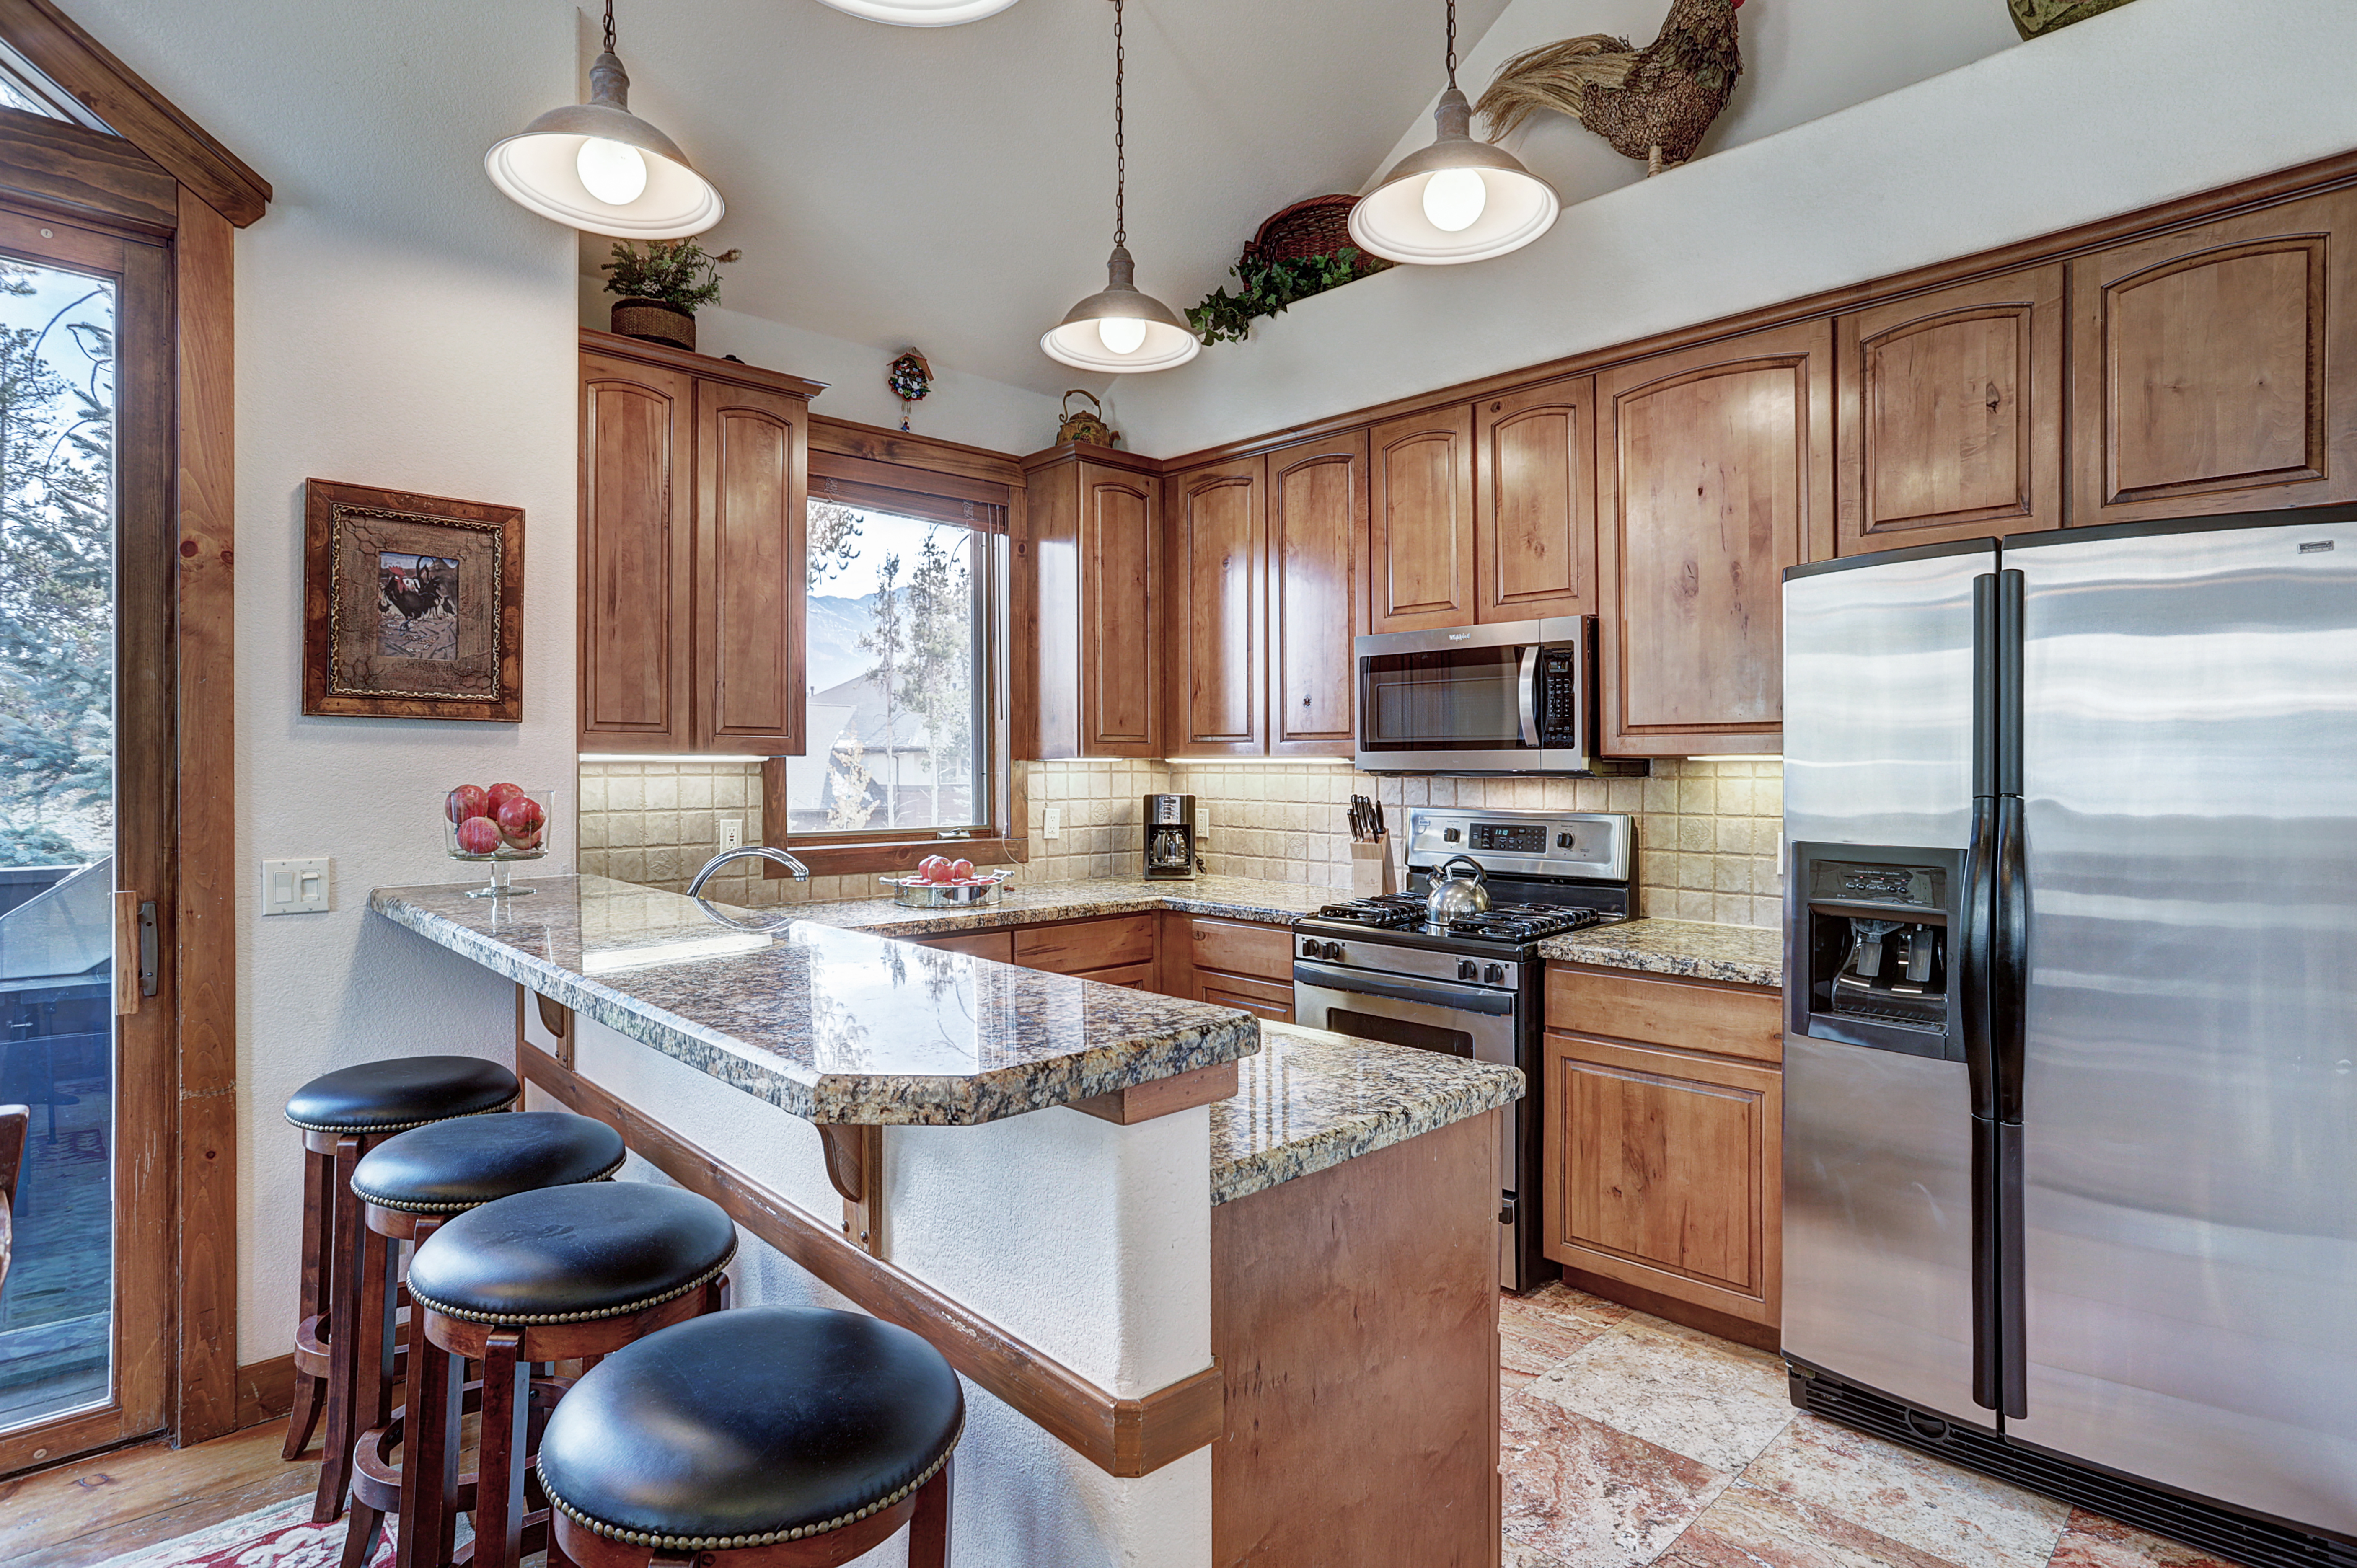 Have a fun family night in and make some great meals in this kitchen - Amber Sky Breckenridge Vacation Rental